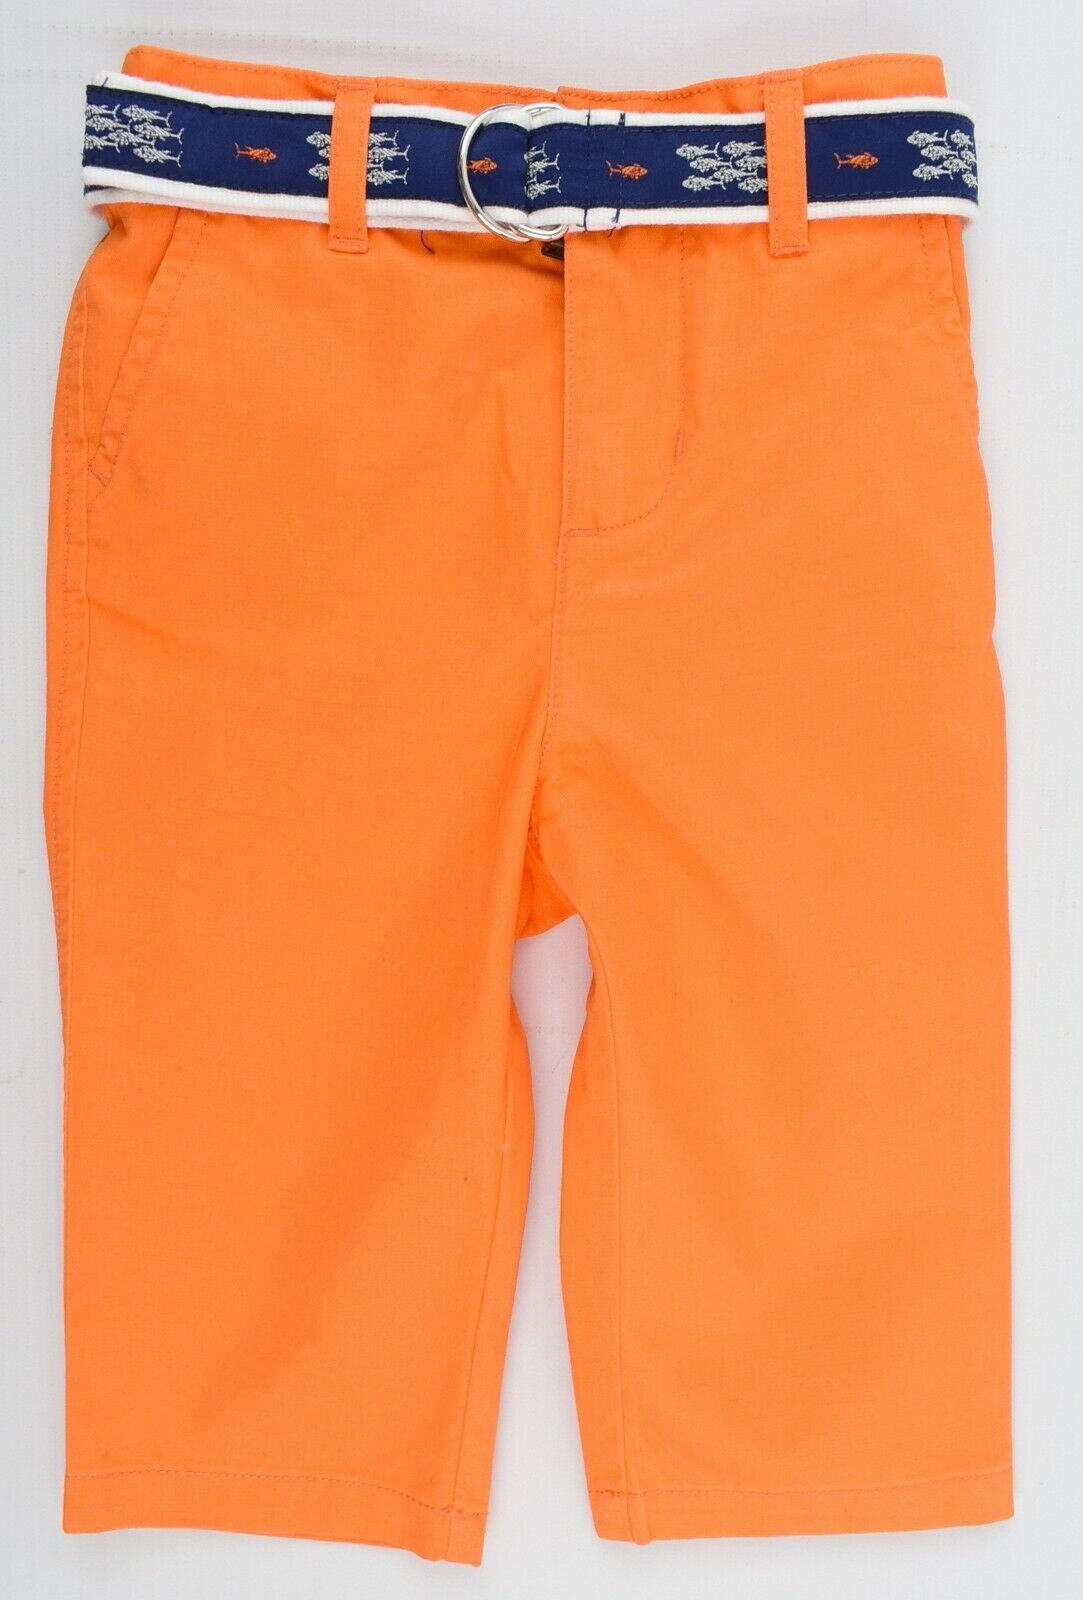 RALPH LAUREN Baby Boys' Orange Chino Trousers Pants, with Belt, size 9 months